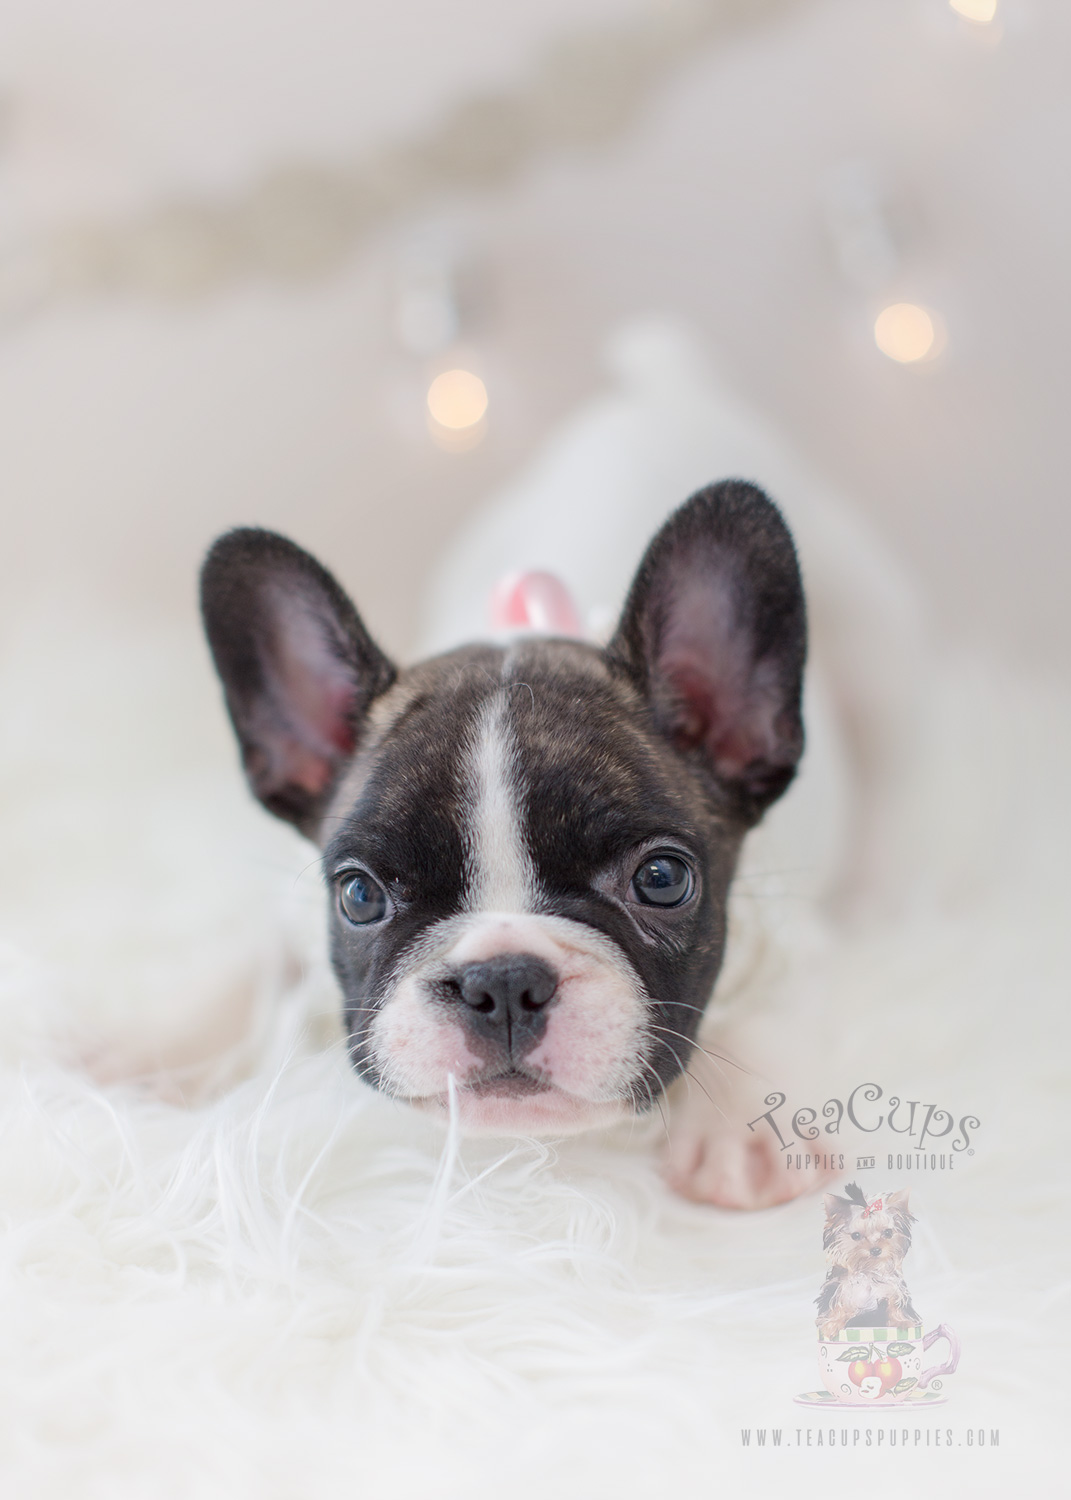 The French Bulldog of your dreams is here! Teacup